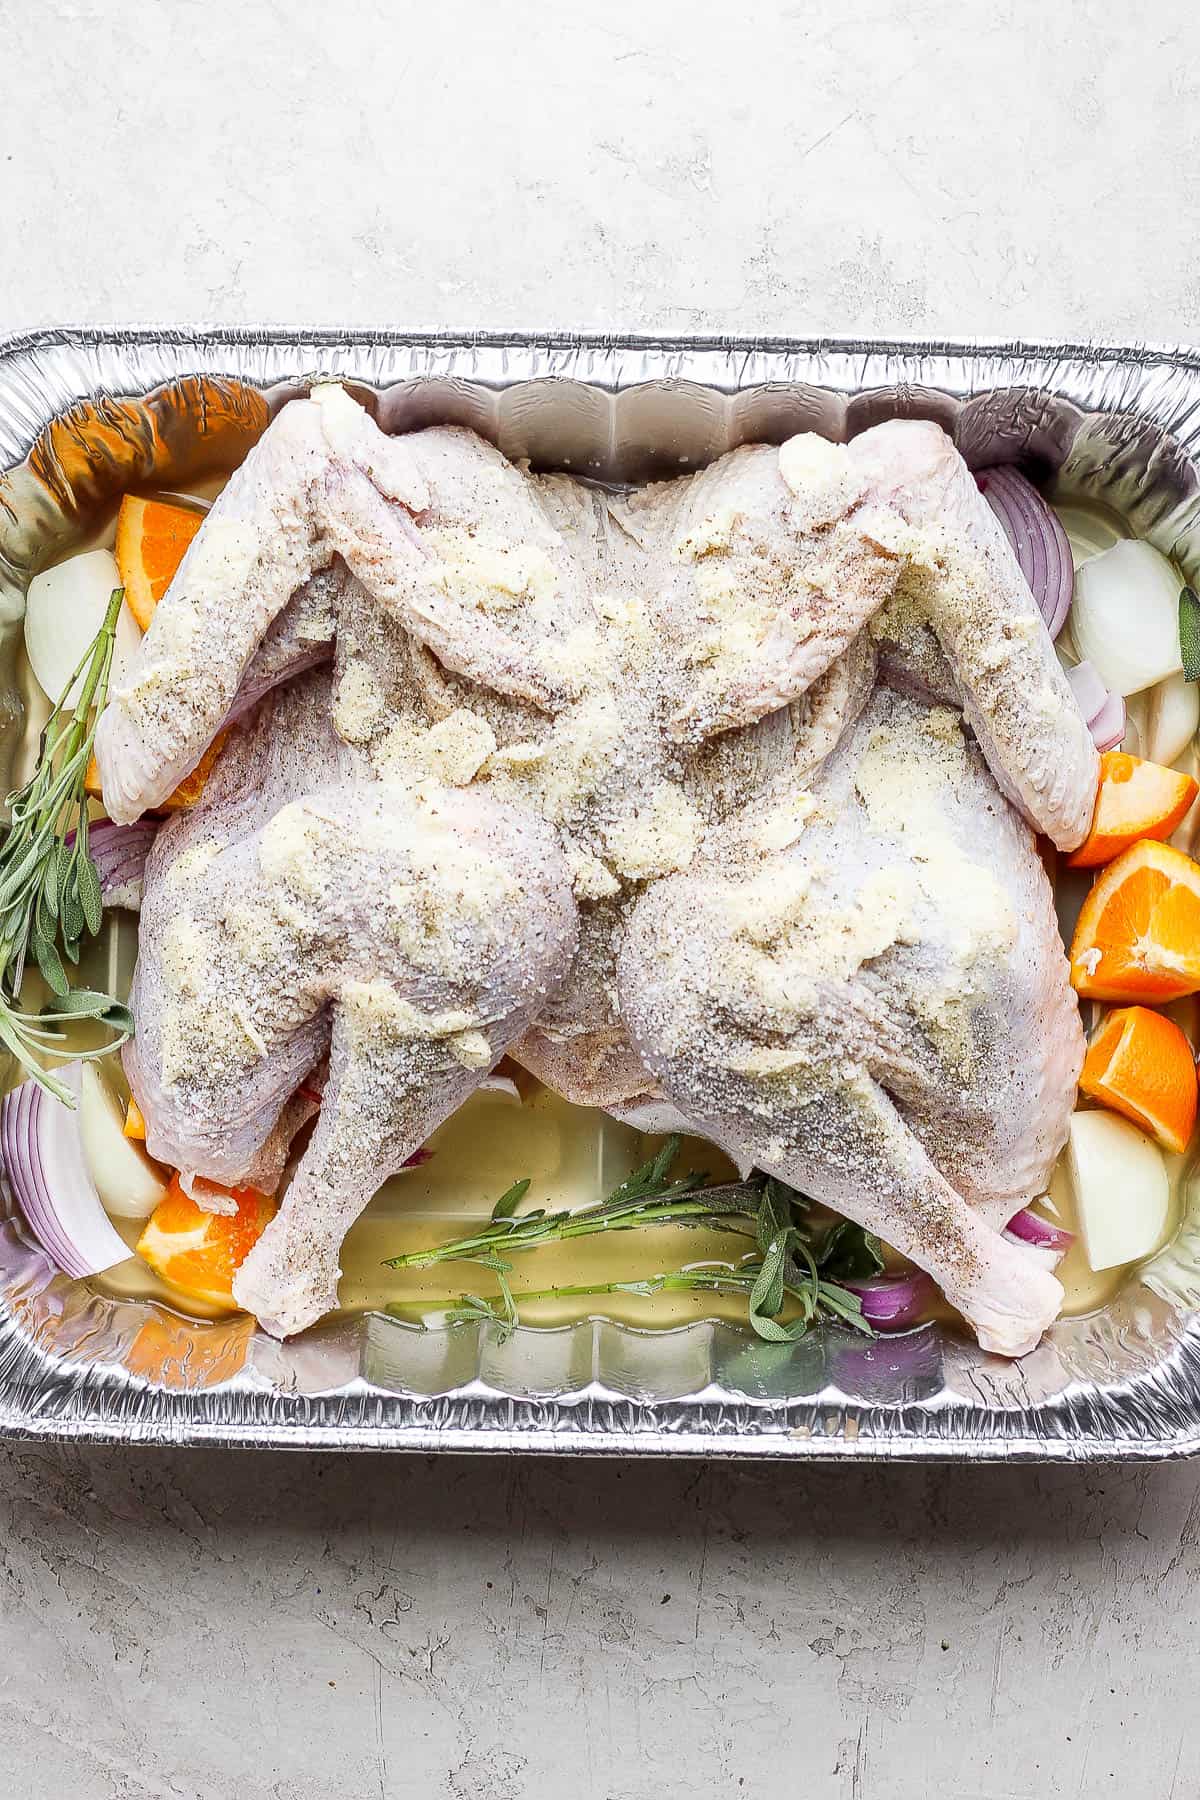 A brined turkey that has been spatchcocked and prepped in a roasting pan.